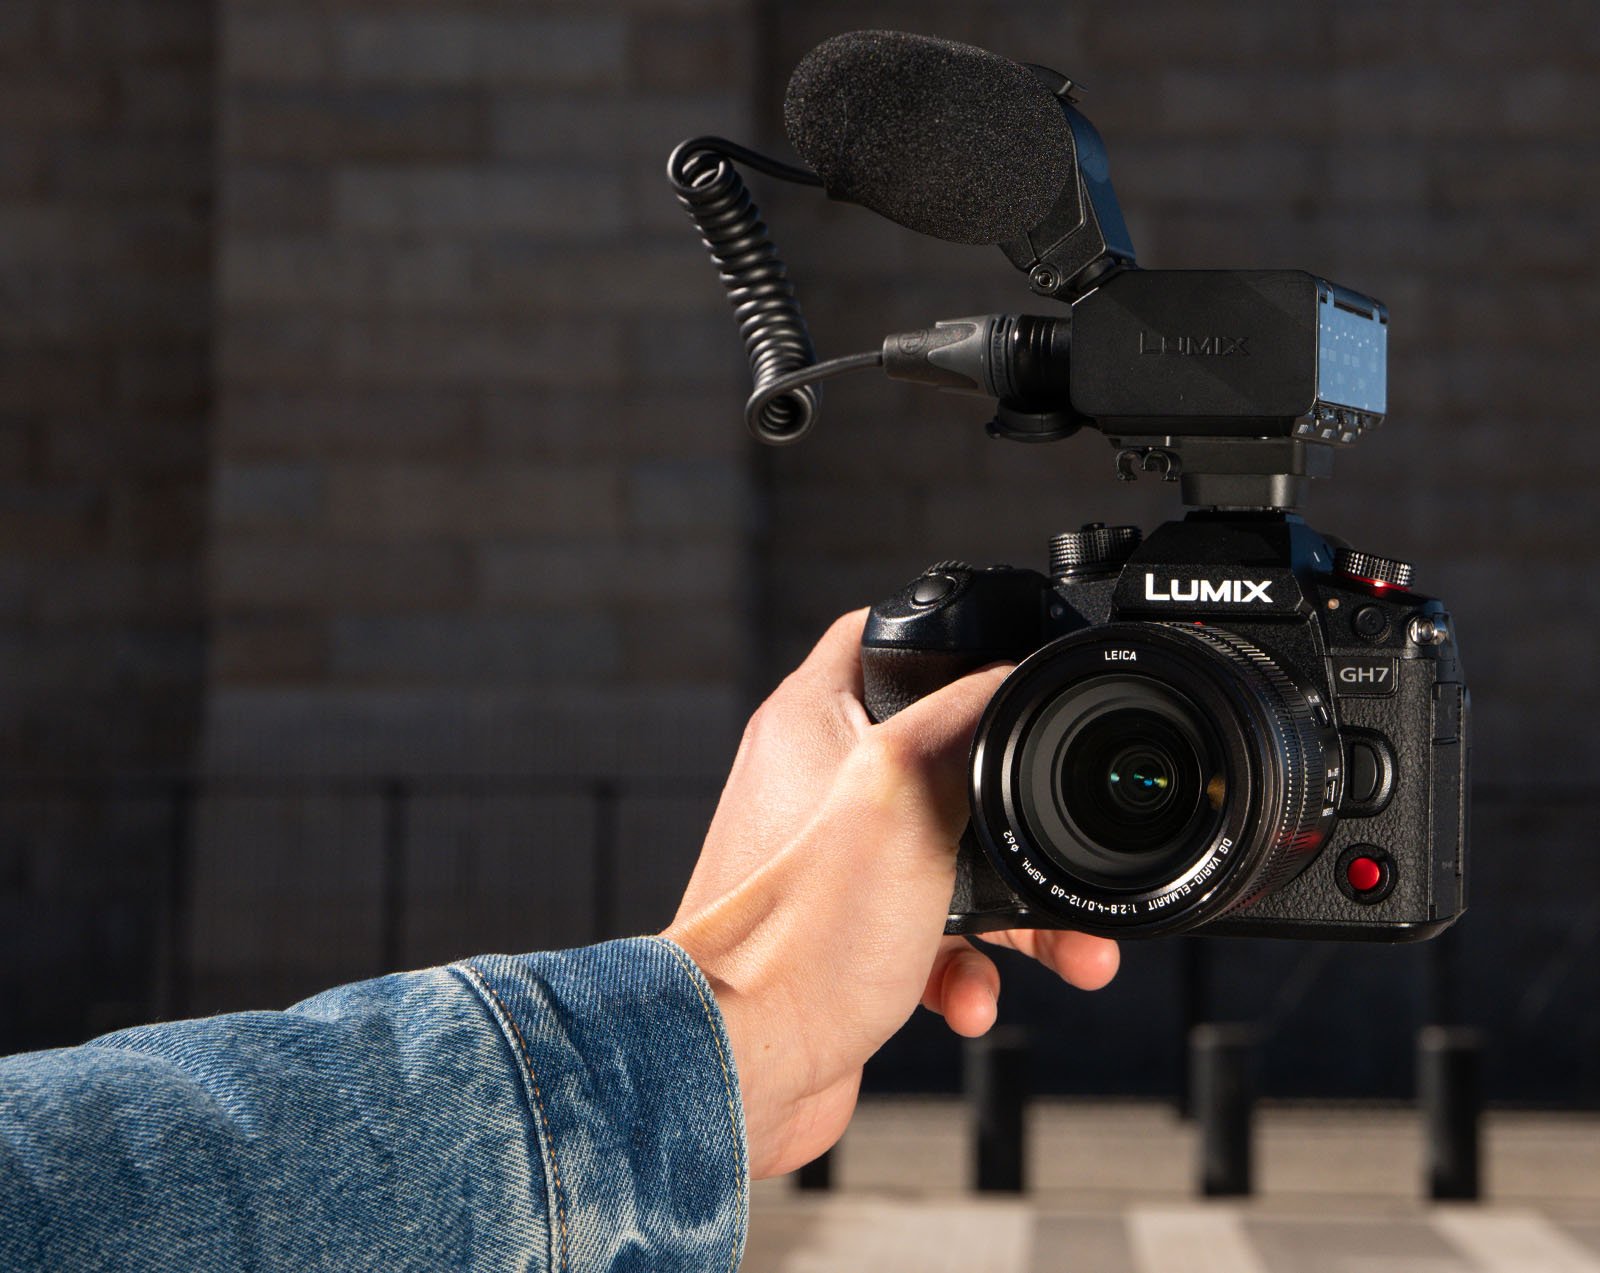 A person in a denim jacket holds up a Lumix GH7 camera with an attached microphone. The camera features prominent branding, visible lens elements, and control dials. The background is out of focus, showing a building and several black posts.